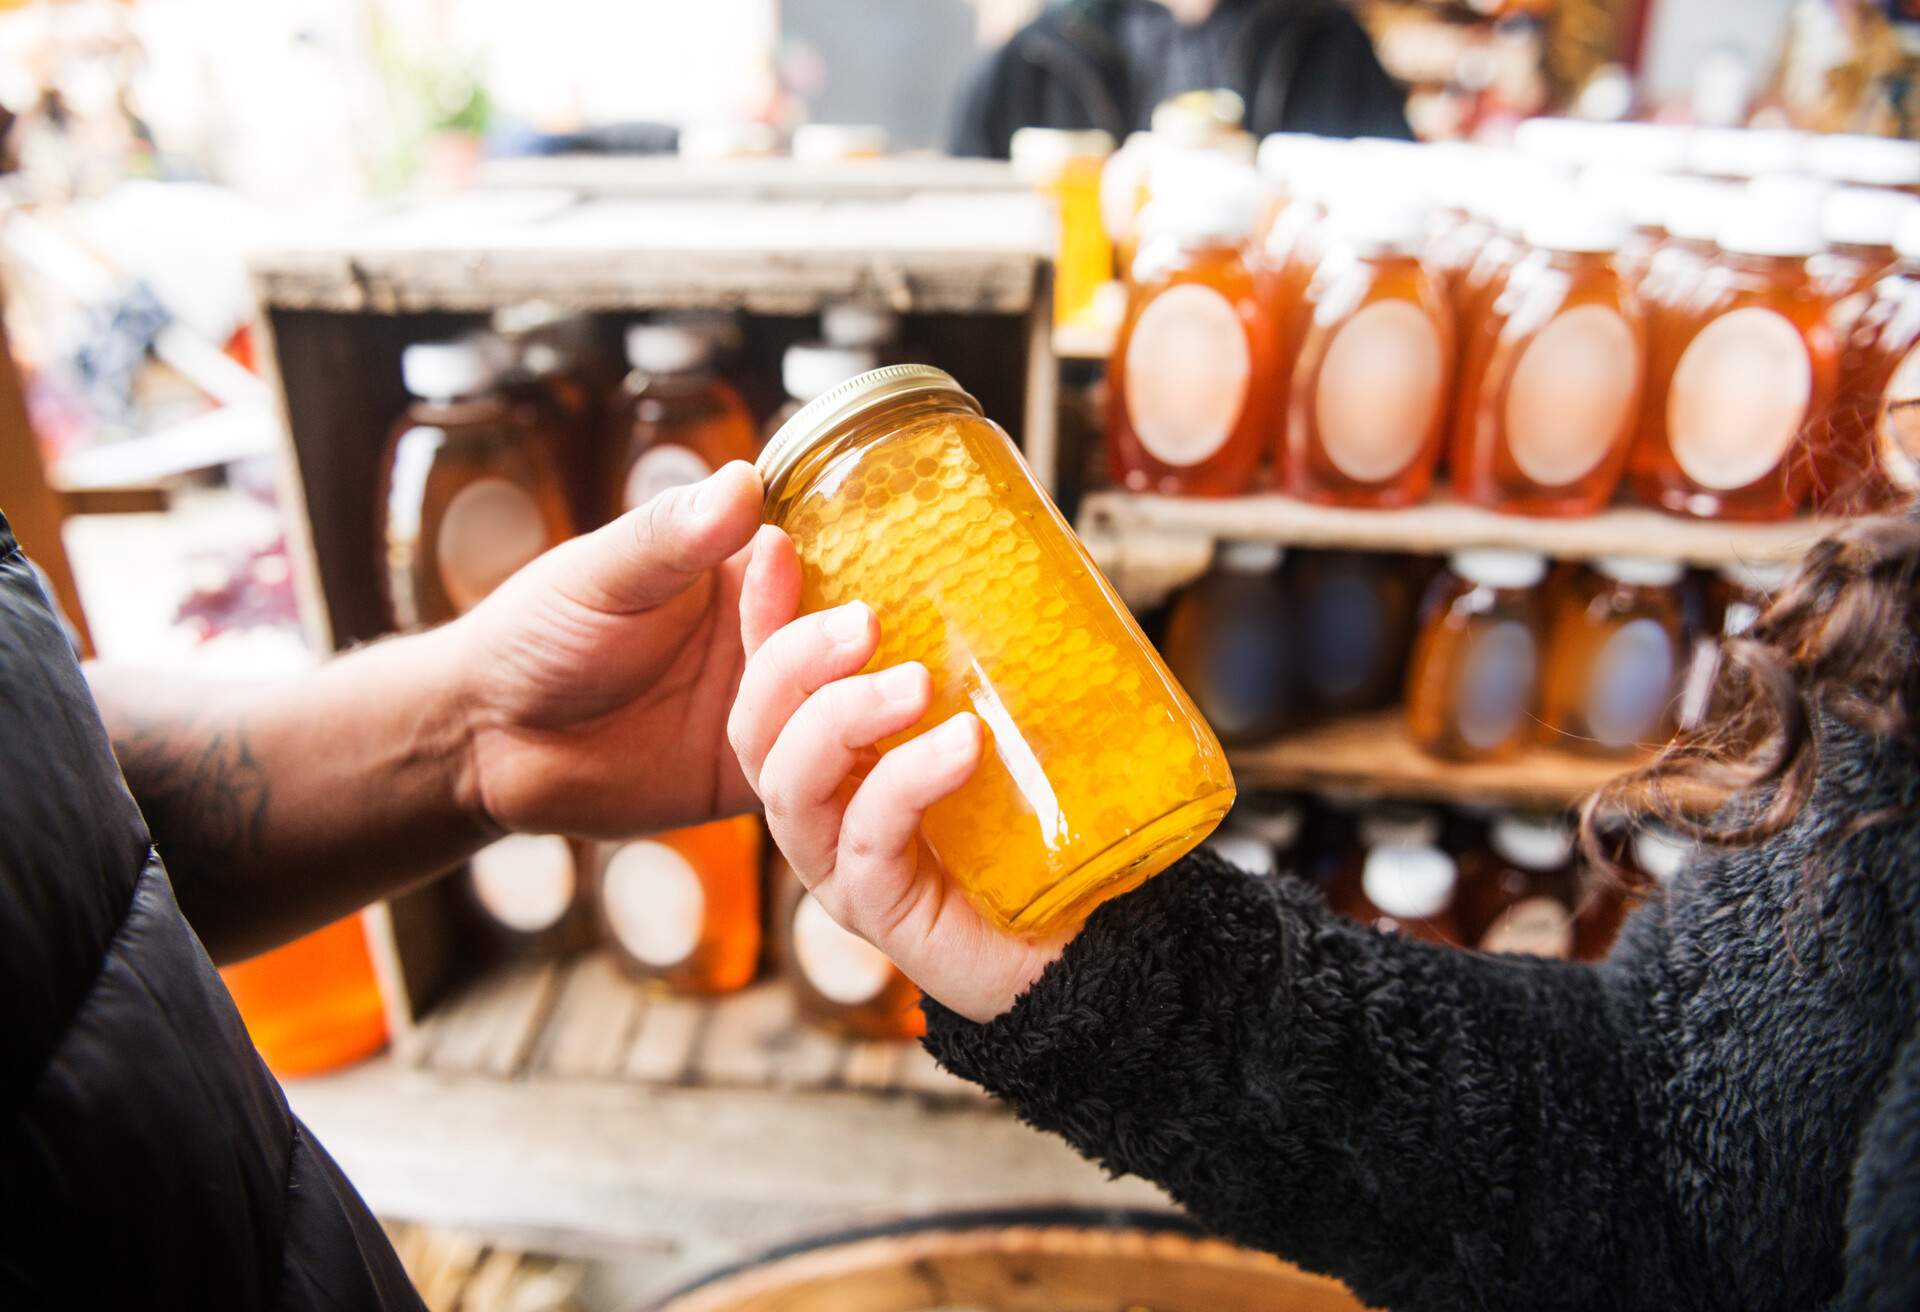 Two people buying a jar of honey at a local market.